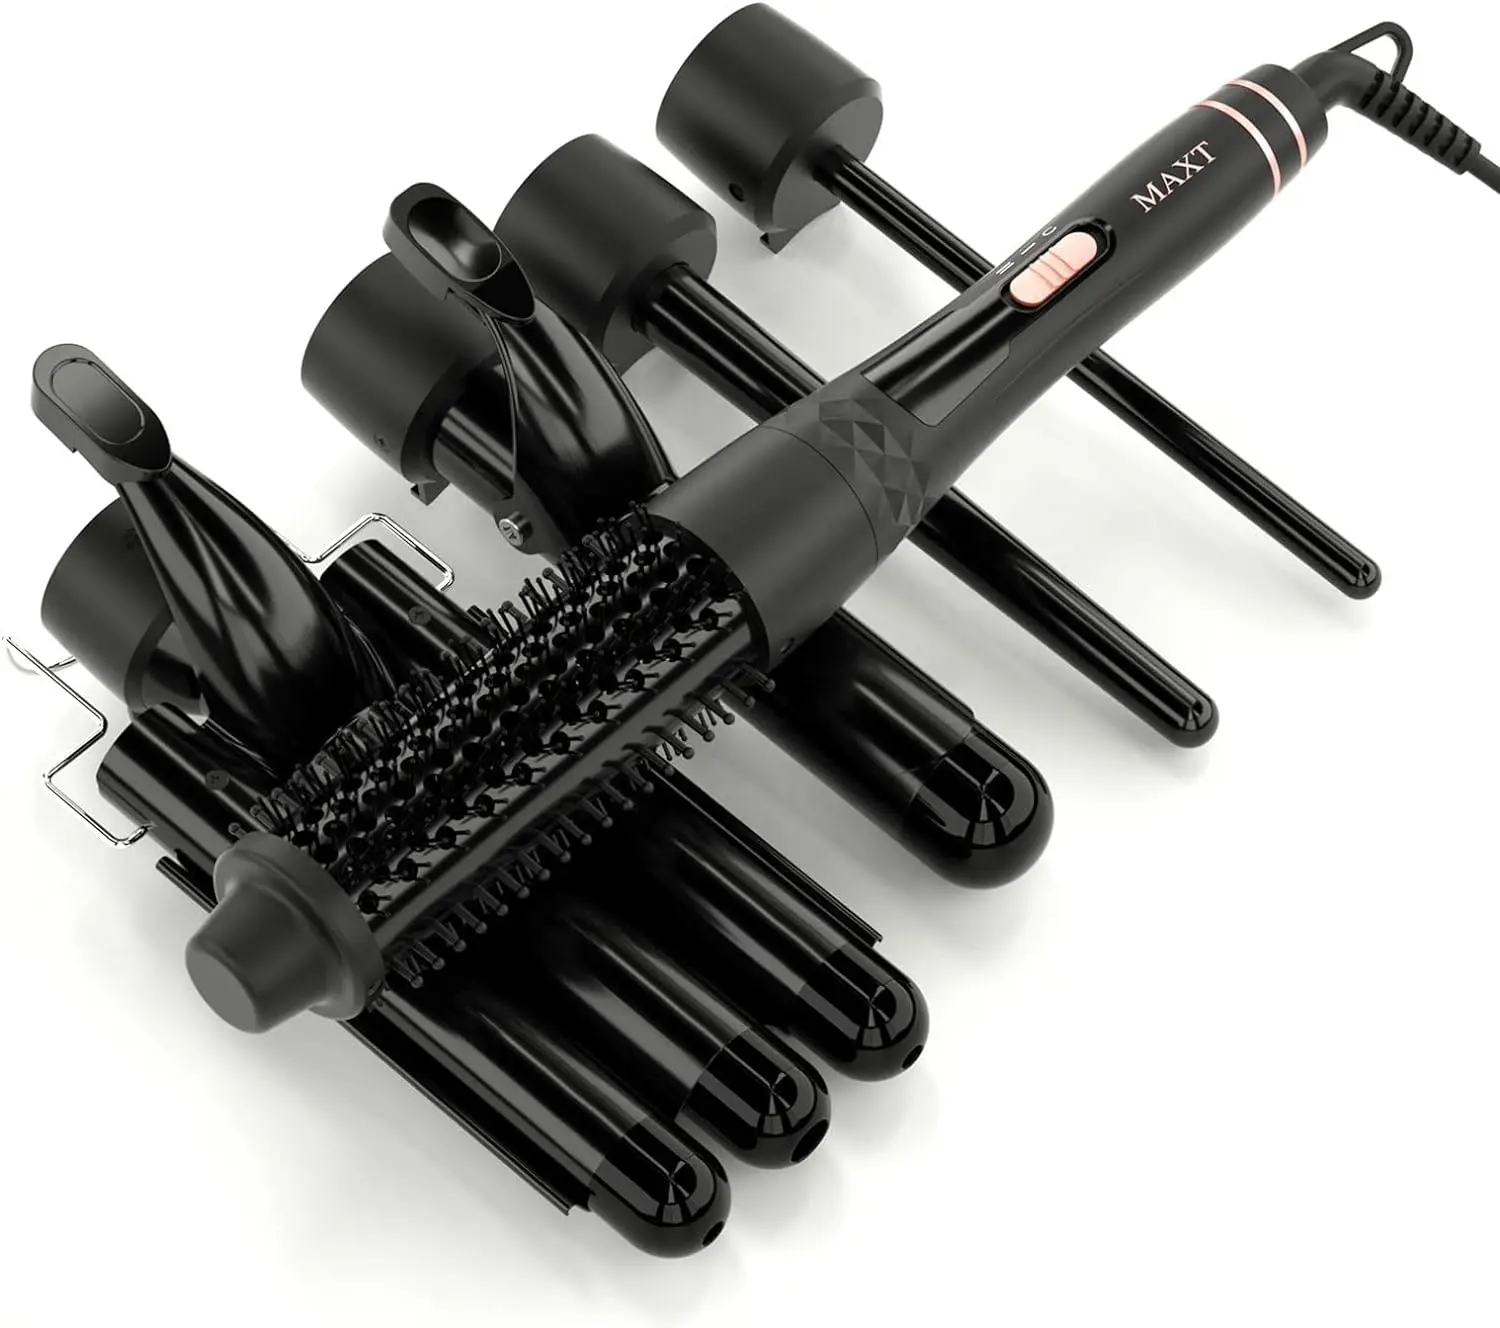 Professional 5 in 1 Hair Waver Curling Set 30s Heat-up Ceramic Iron with 2 Temps and 5 Barrels